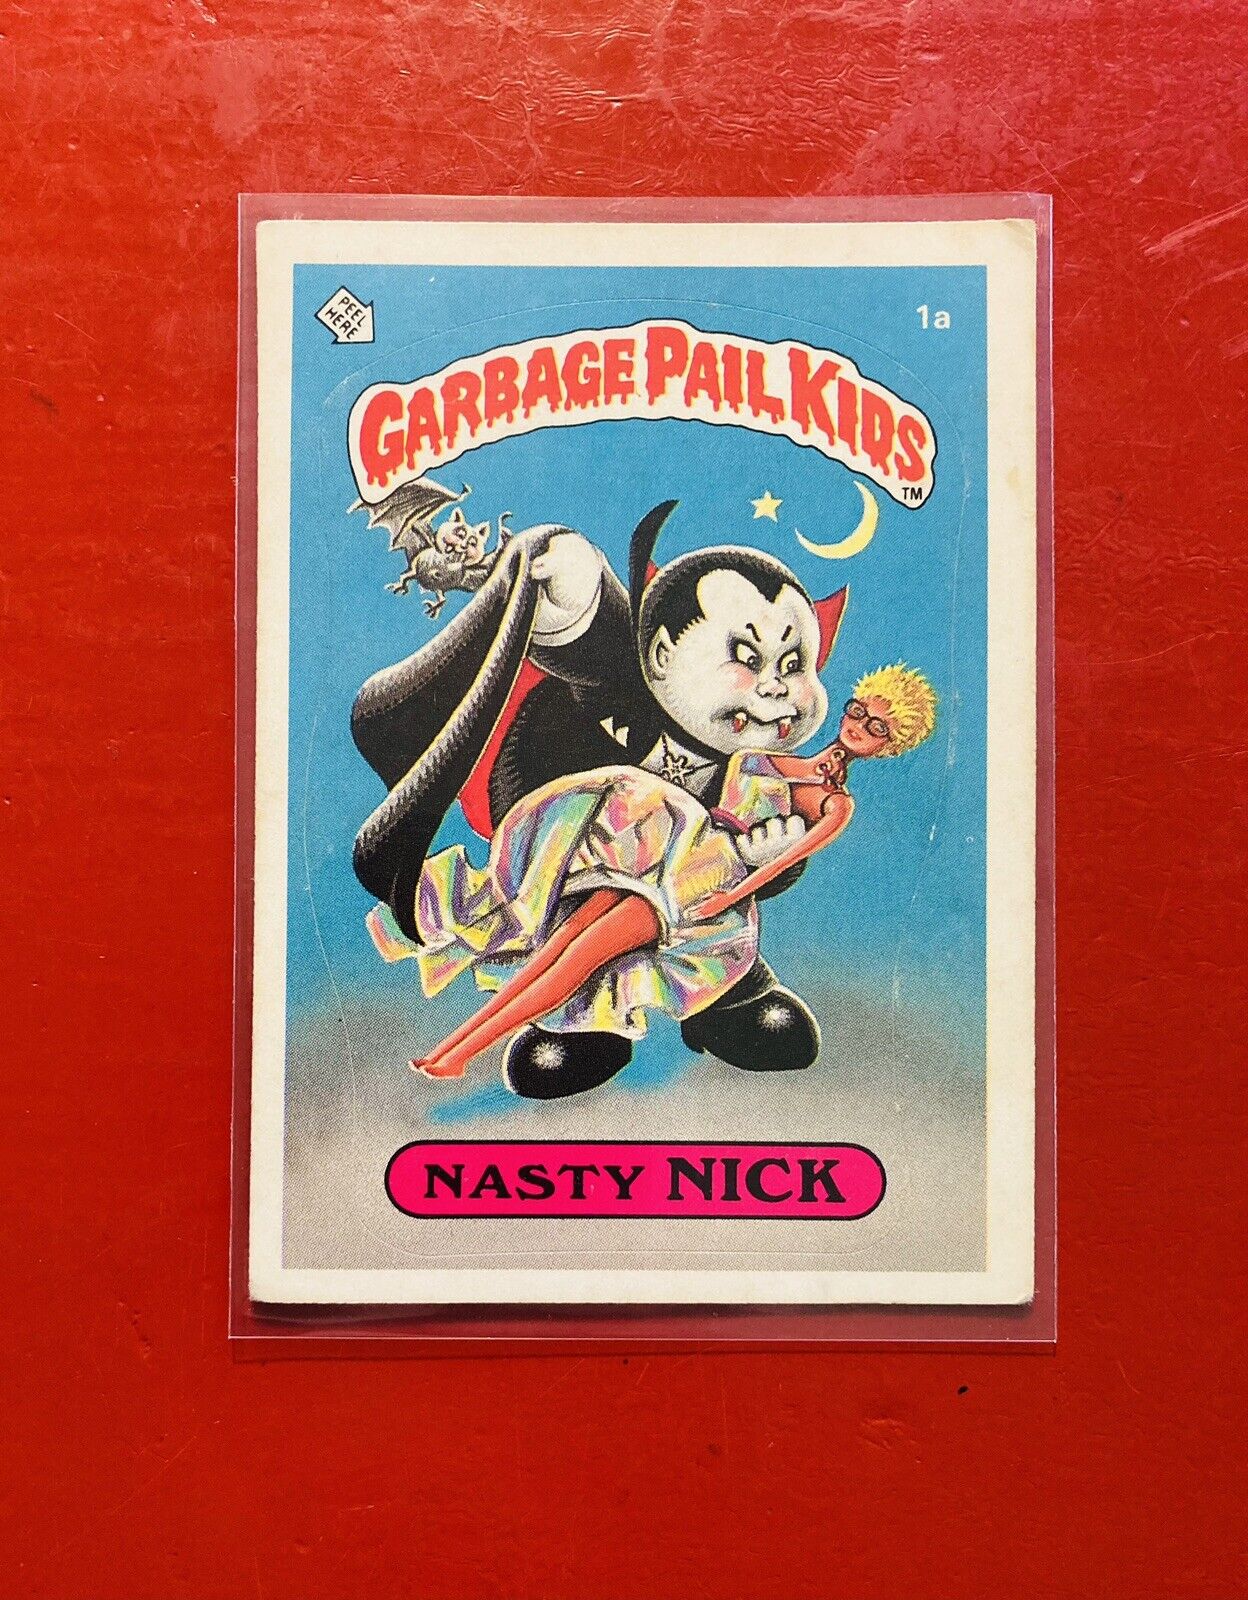 1985 Topps Garbage Pail Kids NASTY NICK 1a Series 1 Glossy one *